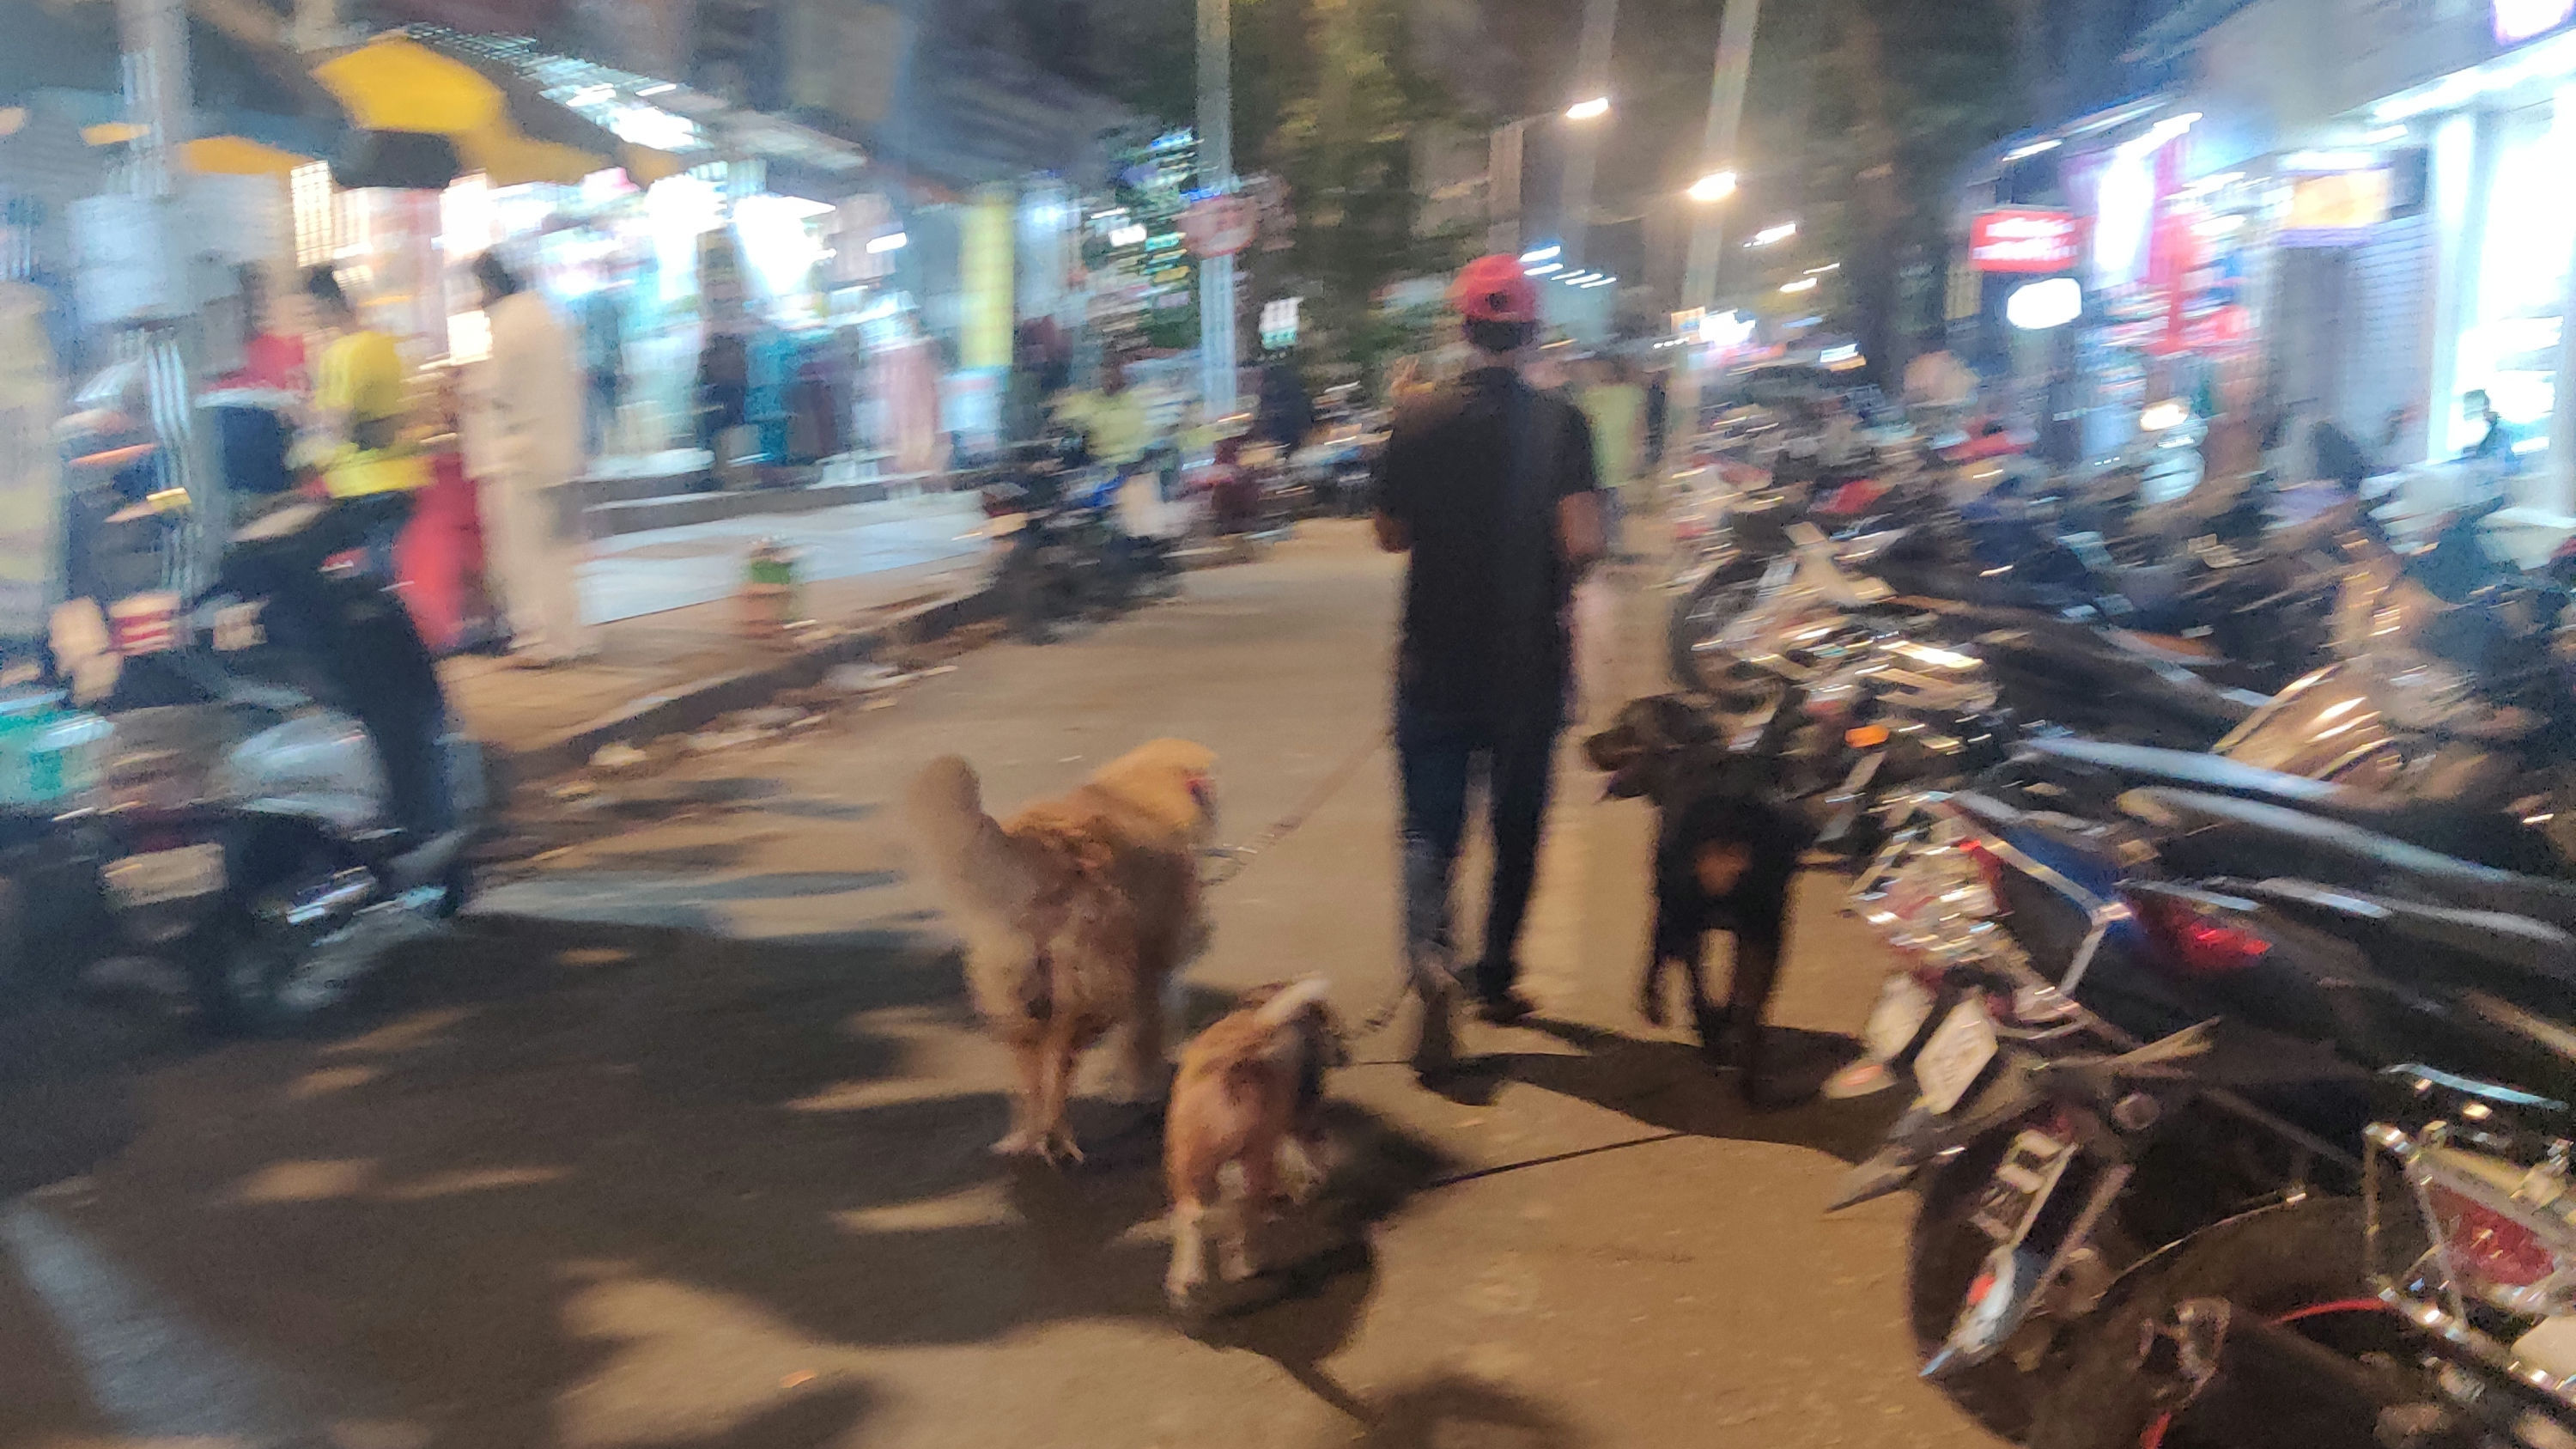 Do you know, Dog feeder is a type of freelancing work in Mumbai? By doing this, people earn decent amount of money. 

Can you guess, how much they get paid monthly for this ?
